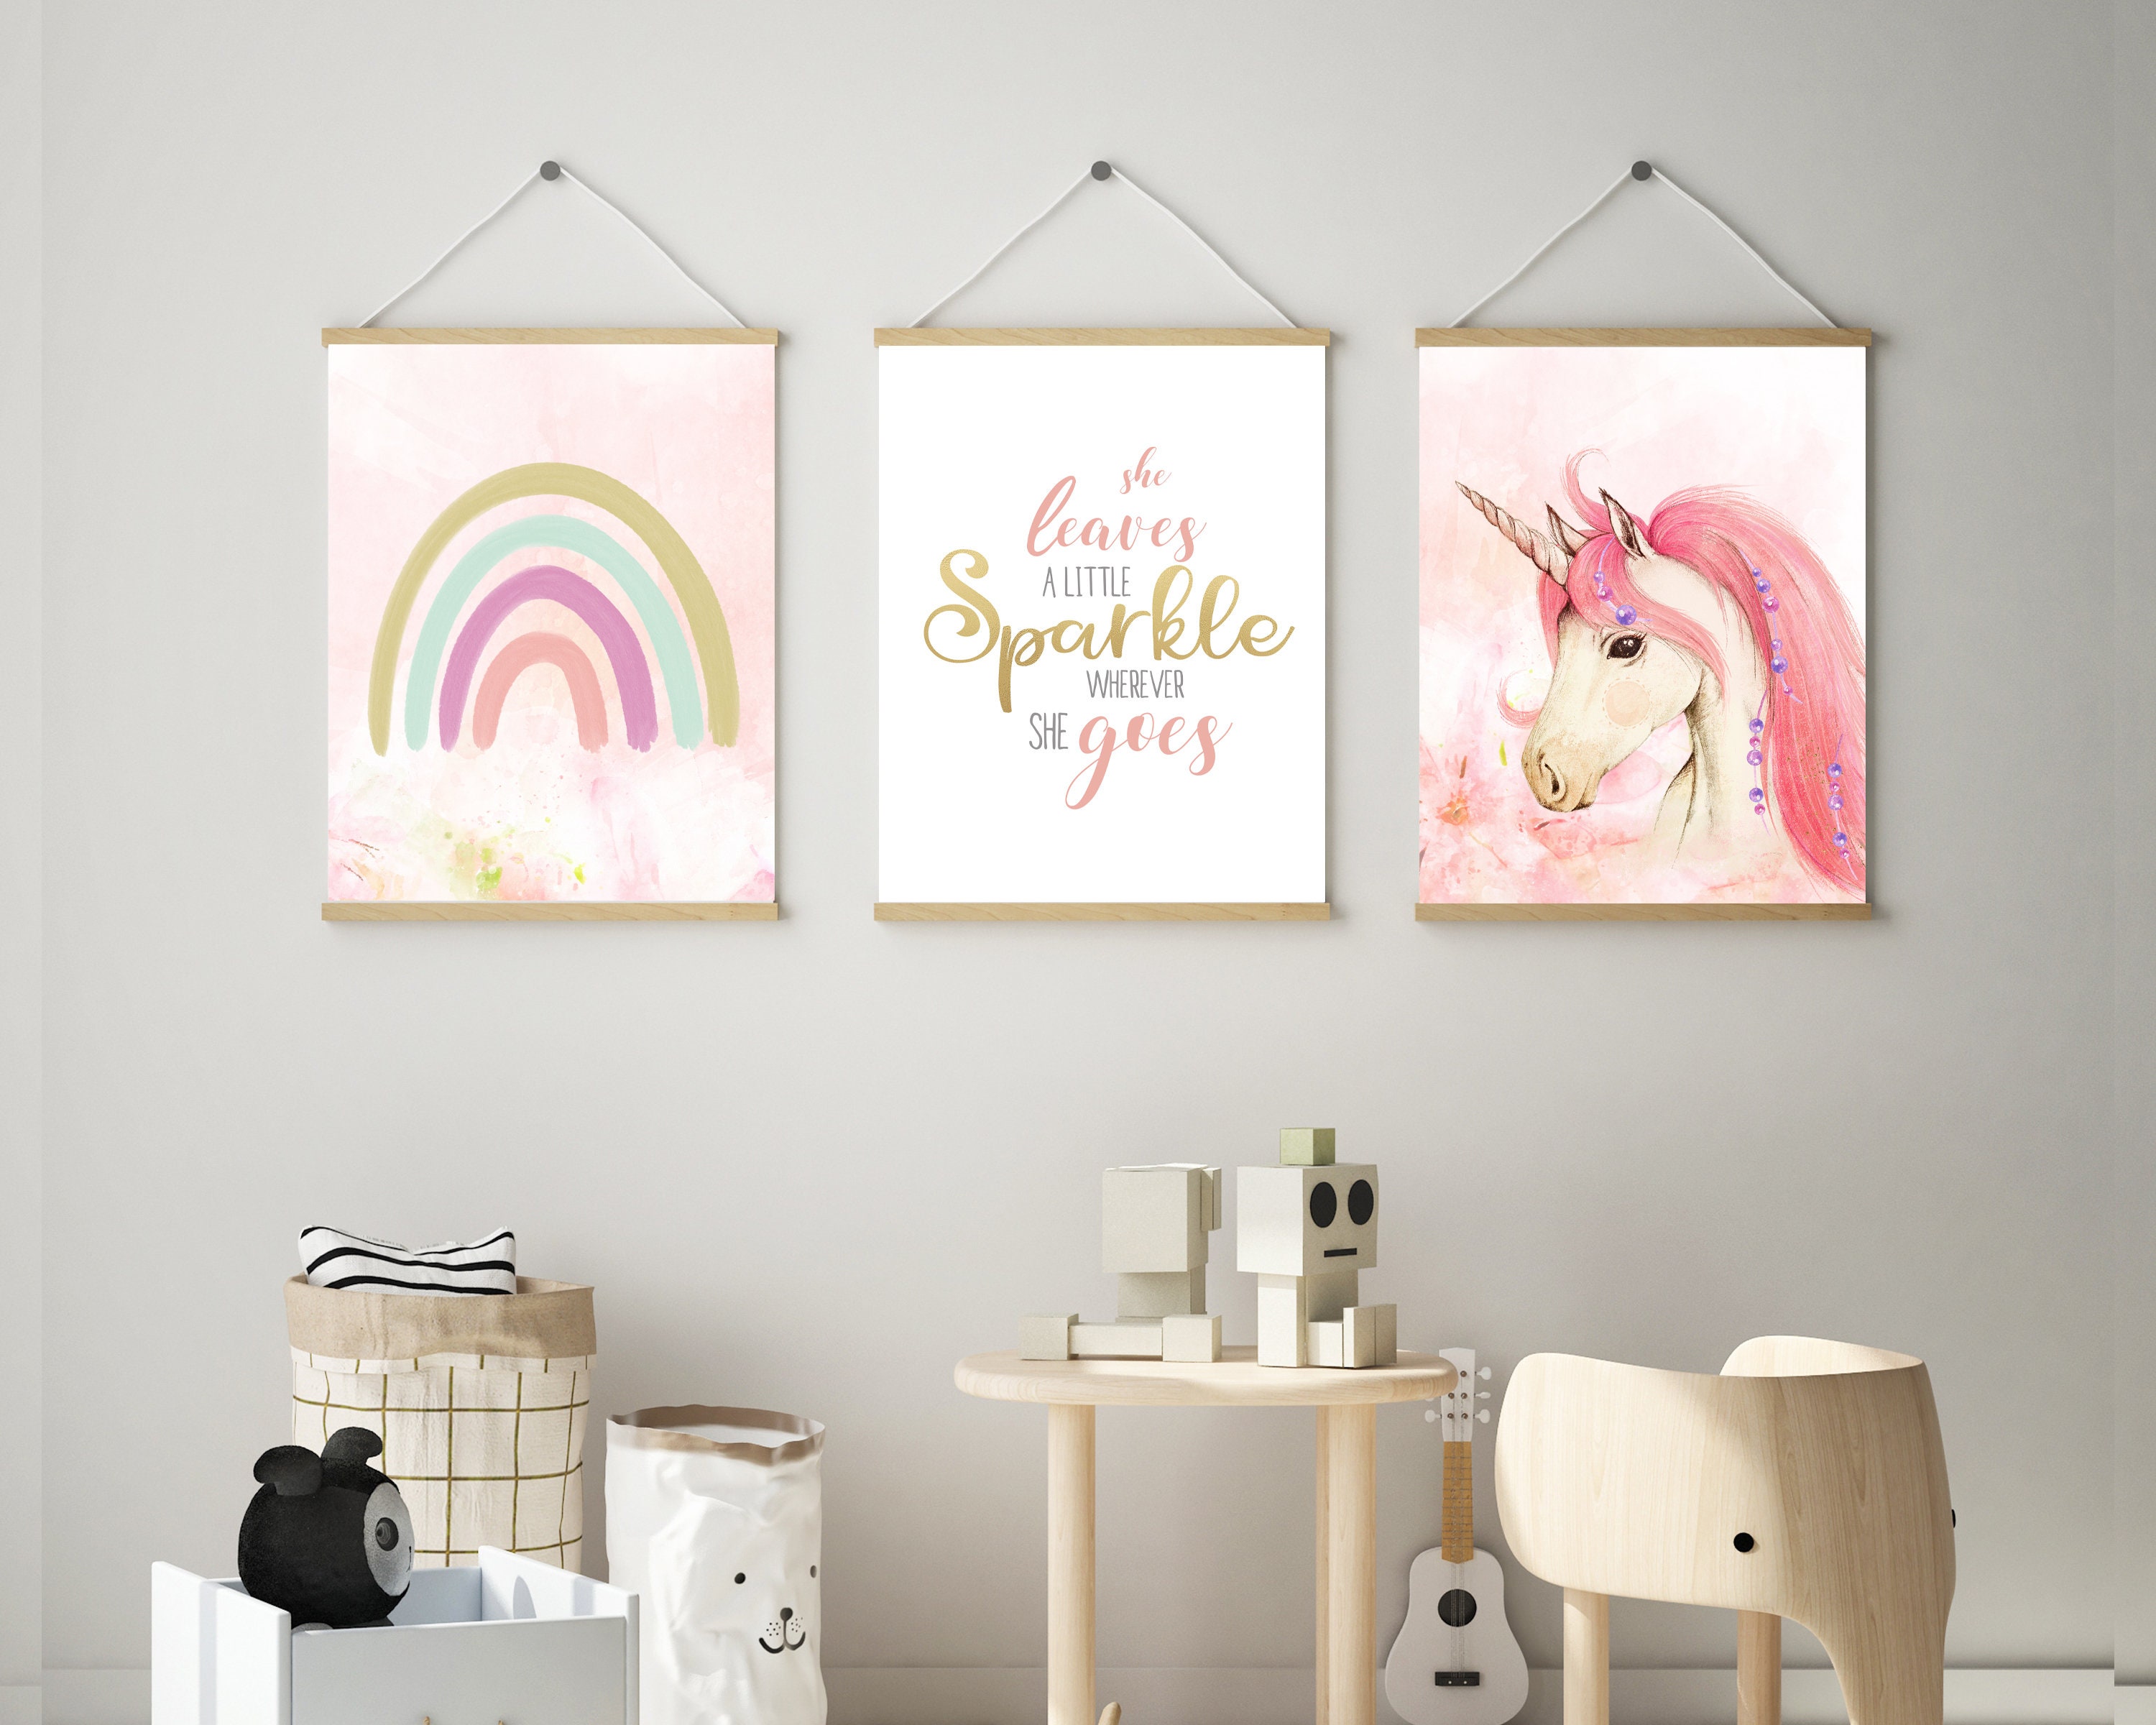 Set of 3 Prints, Personalized Gifts, Art For Kids Hub, Above Bed Decor,  Unicorn, Art Print, Love Yourself, Name Sign, Gifts For Kids, Poster 